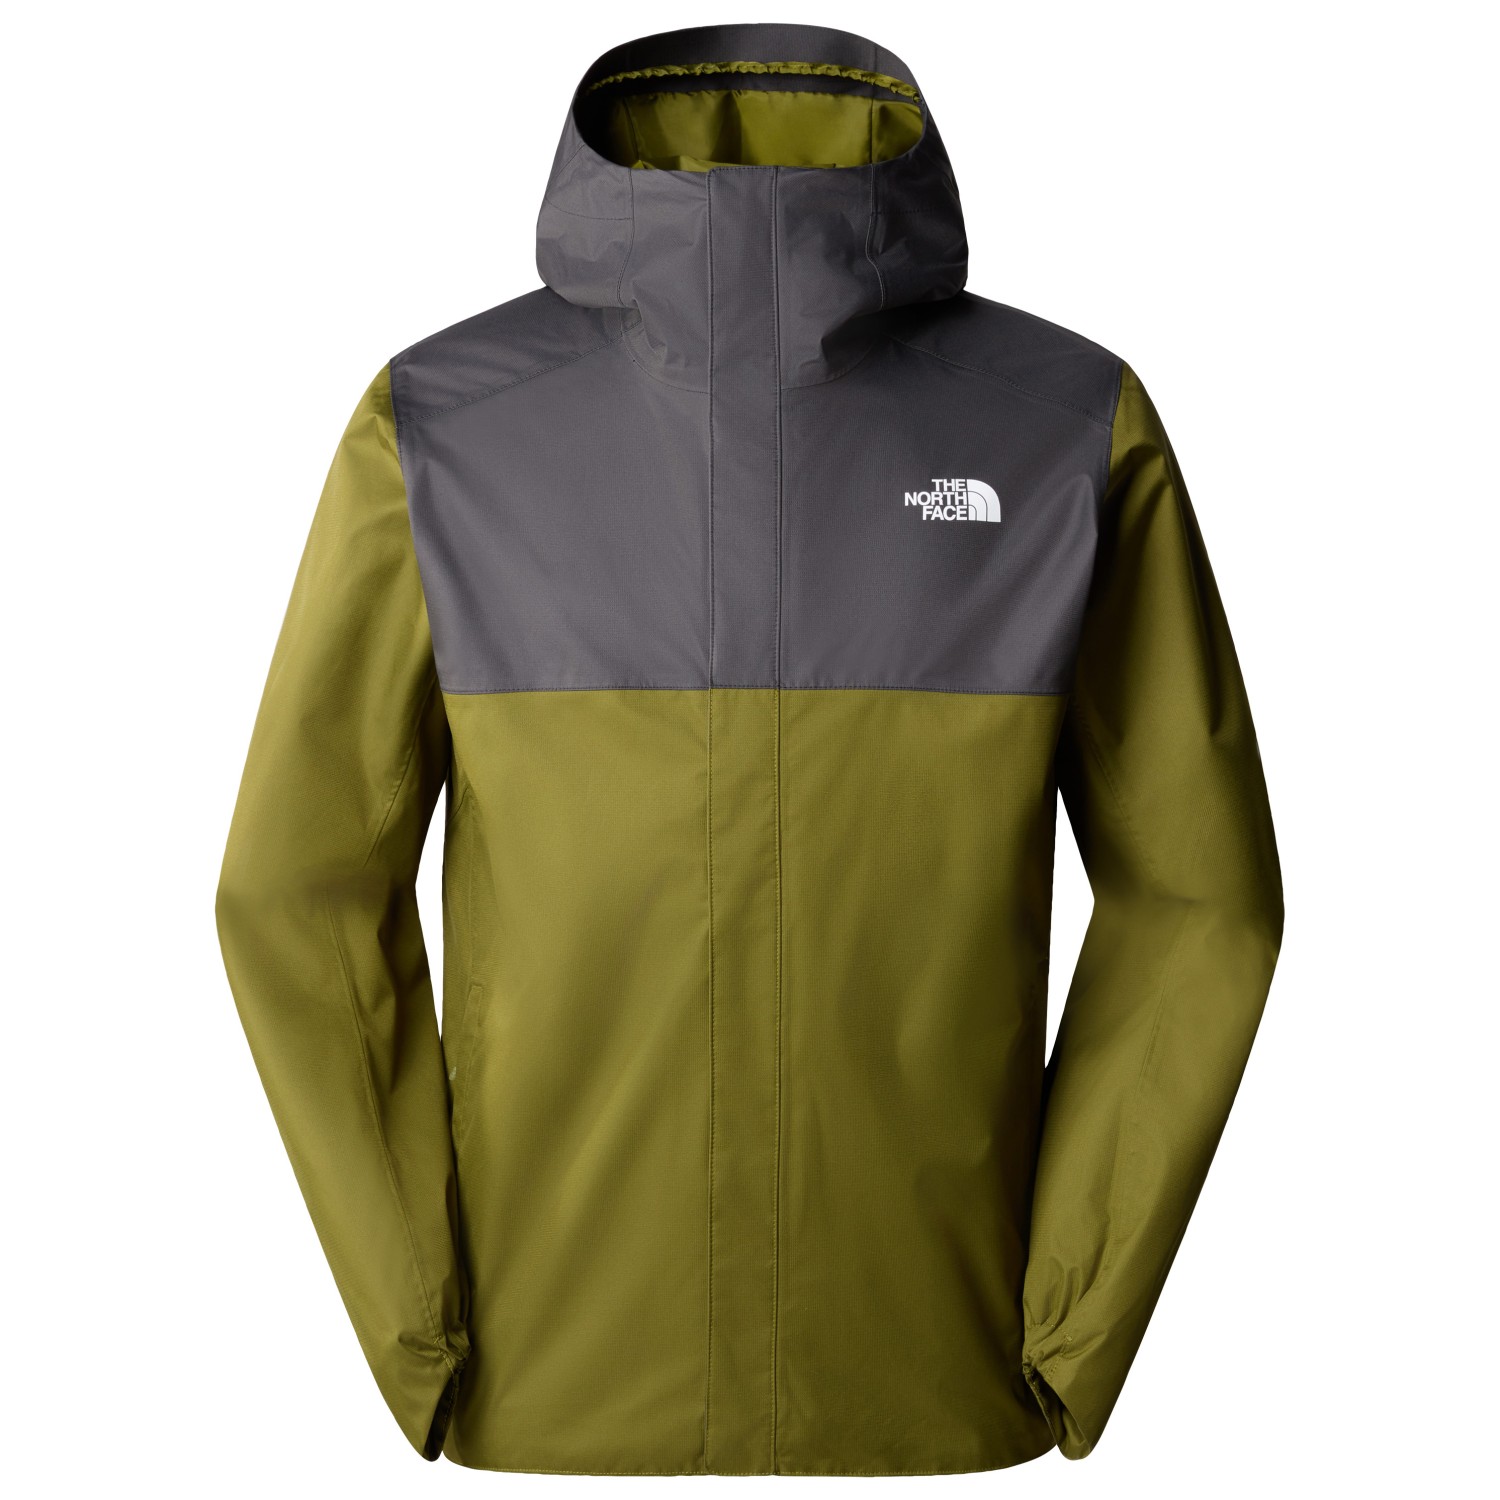 Дождевик The North Face Quest Zip In, цвет Forest Olive/Asphalt Grey куртка the north face cropped quest светло оранжевый